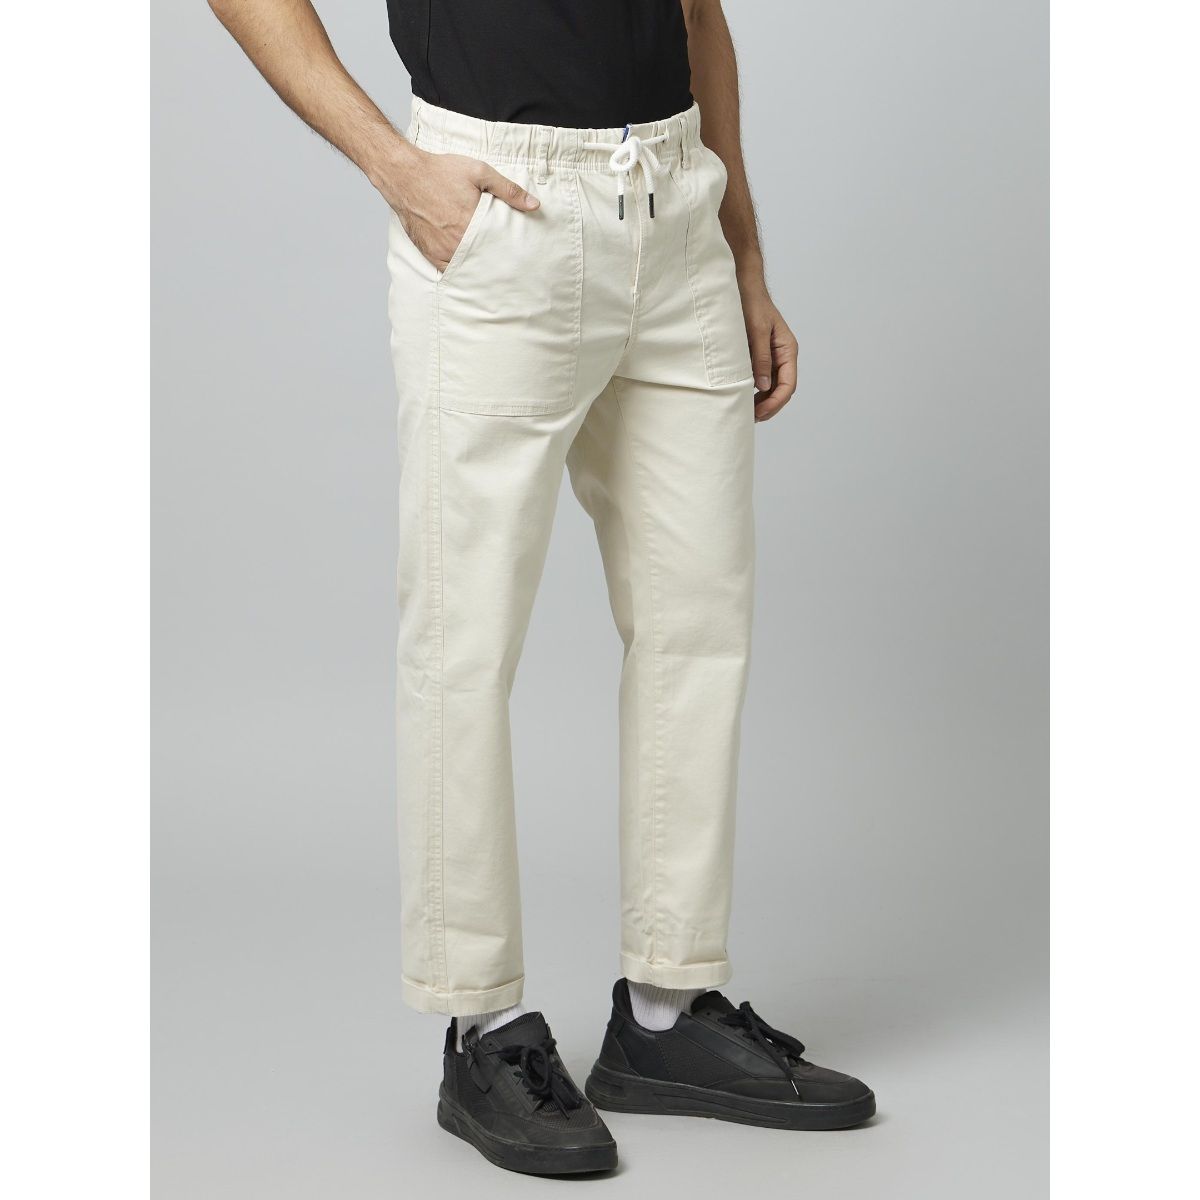 Buy CELIO JEANS Solid Polyester Cotton Slim Fit Men's Casual Trousers |  Shoppers Stop